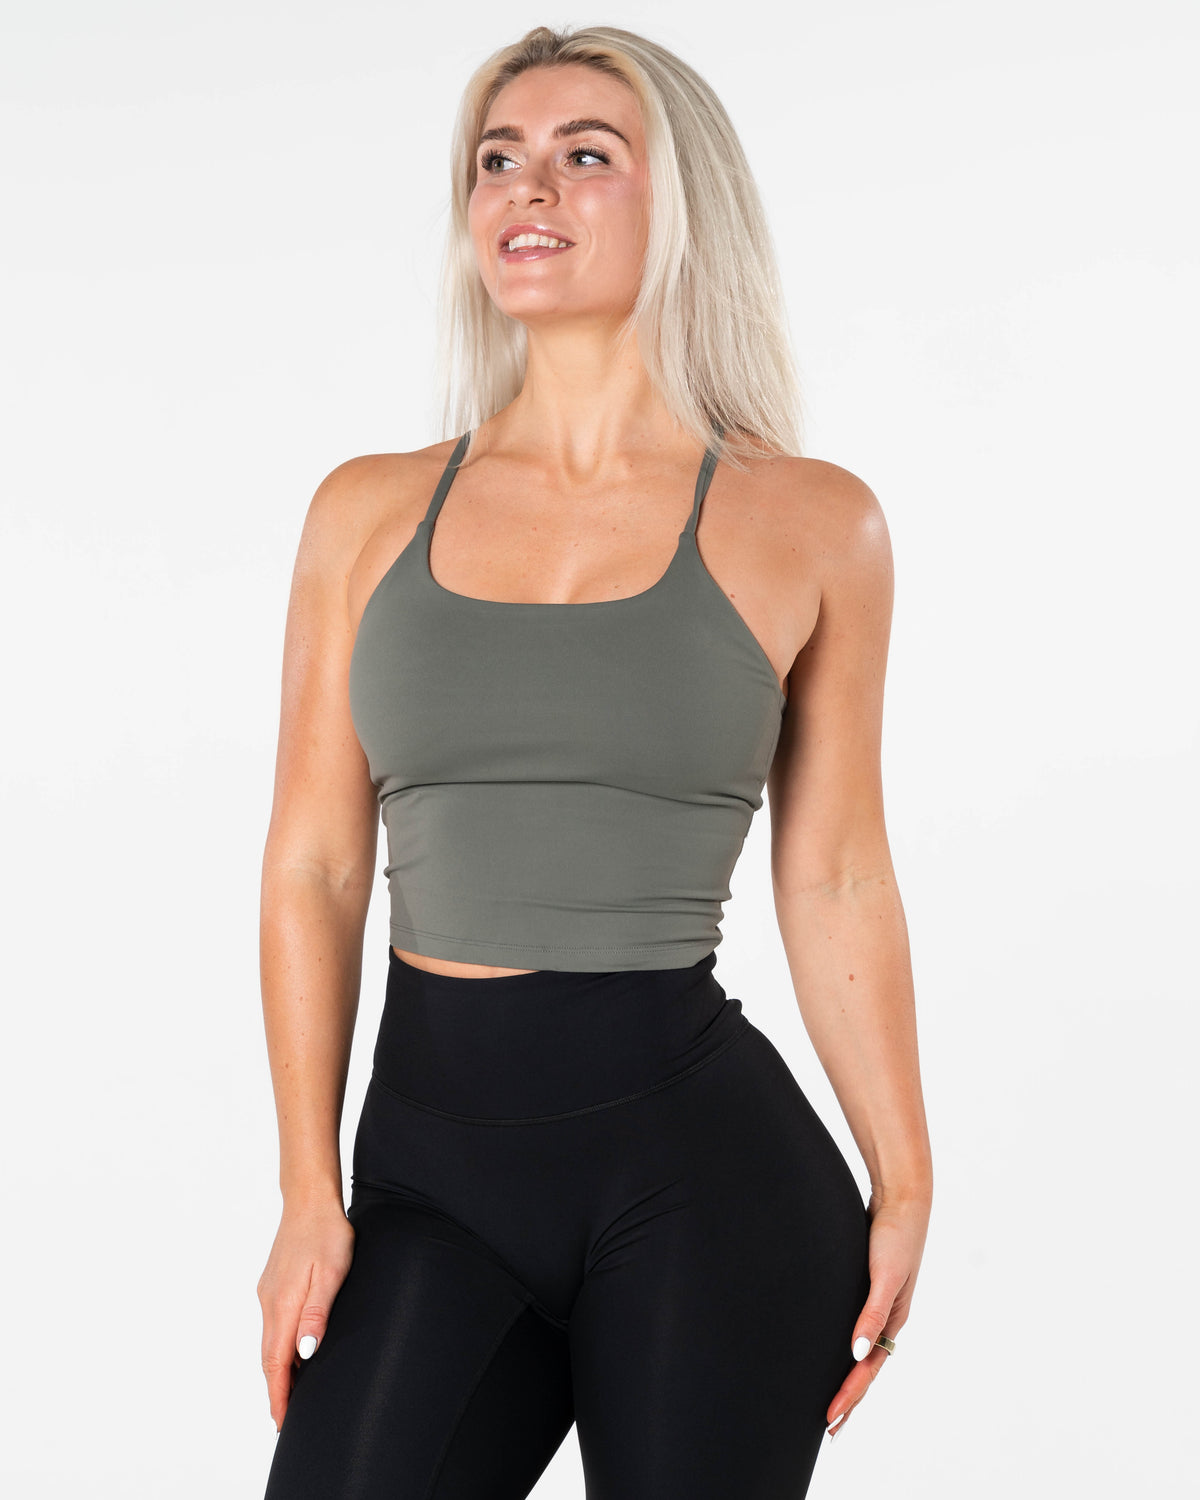 CORE  A collection of all the basic workout clothes you need